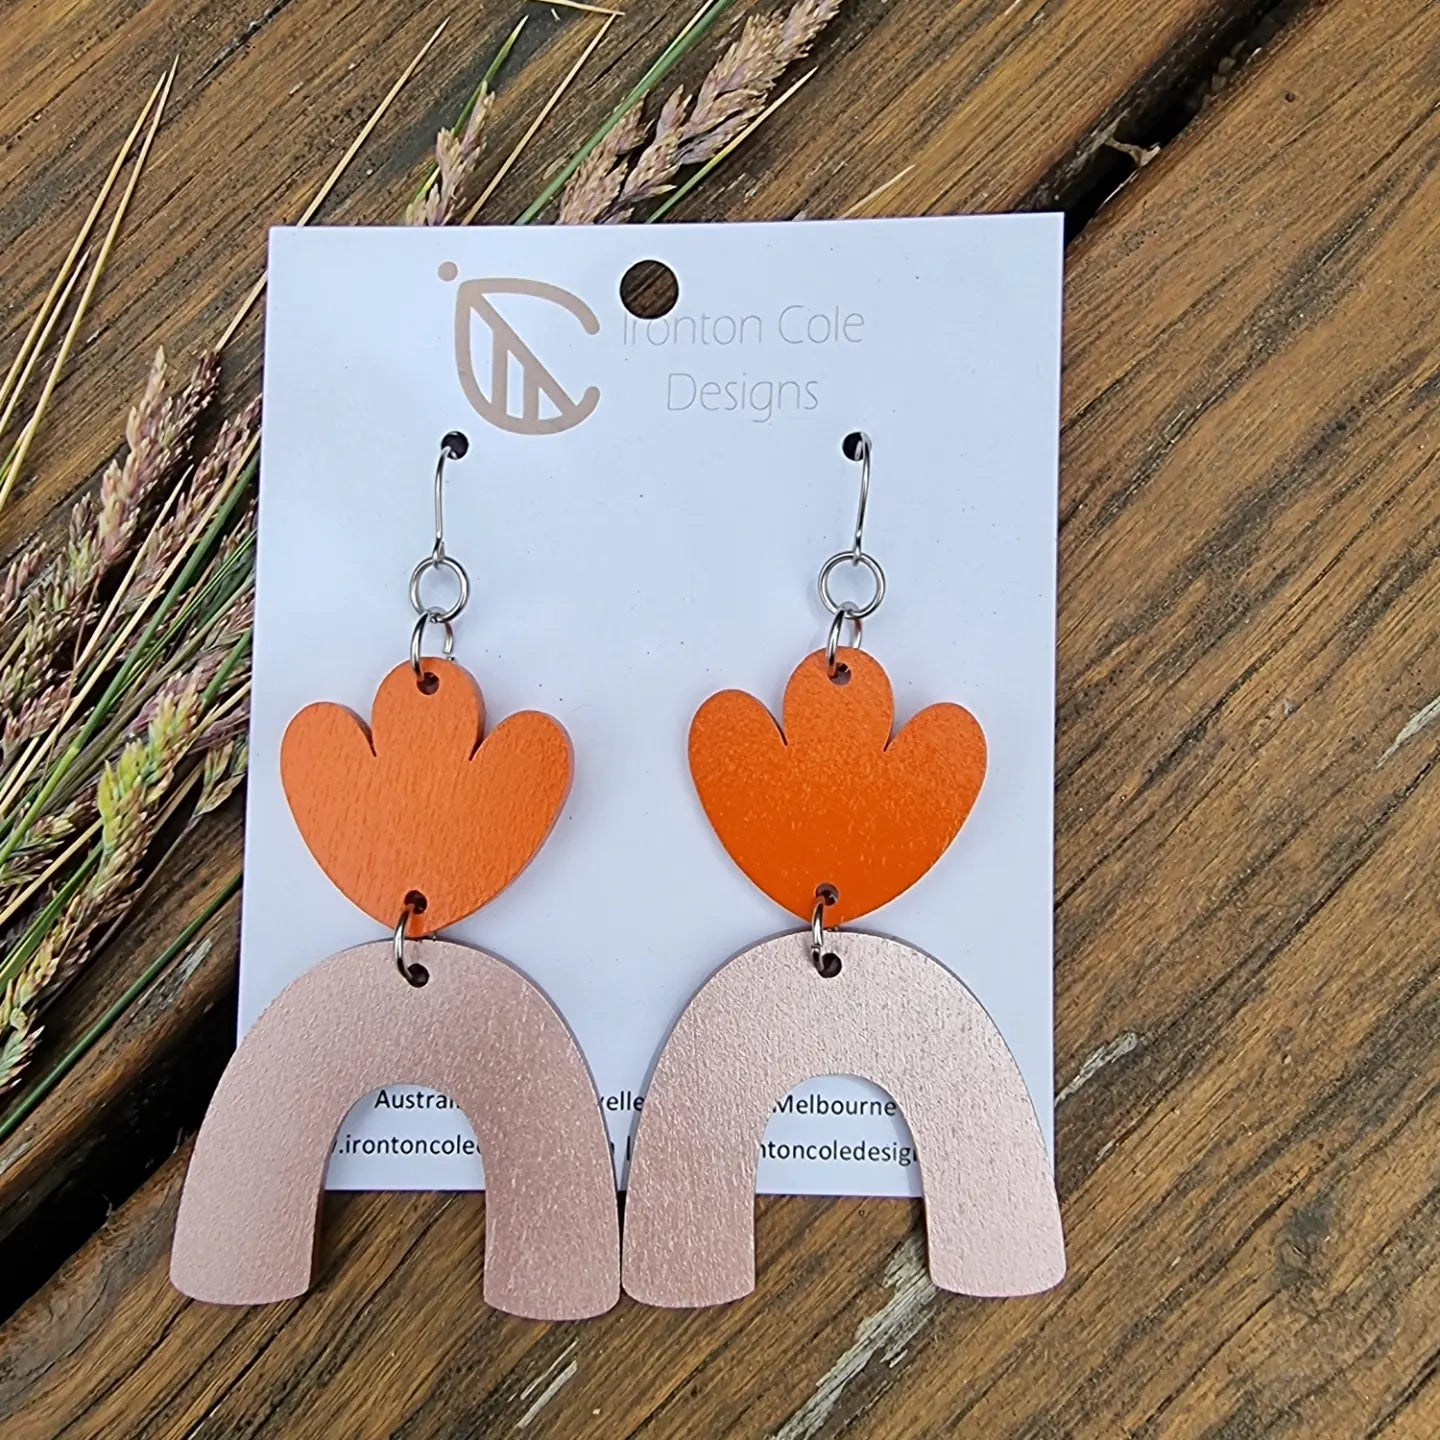 An orange painted flower petals paired with a bronze arch. Hypoallergenic silver hooks. 